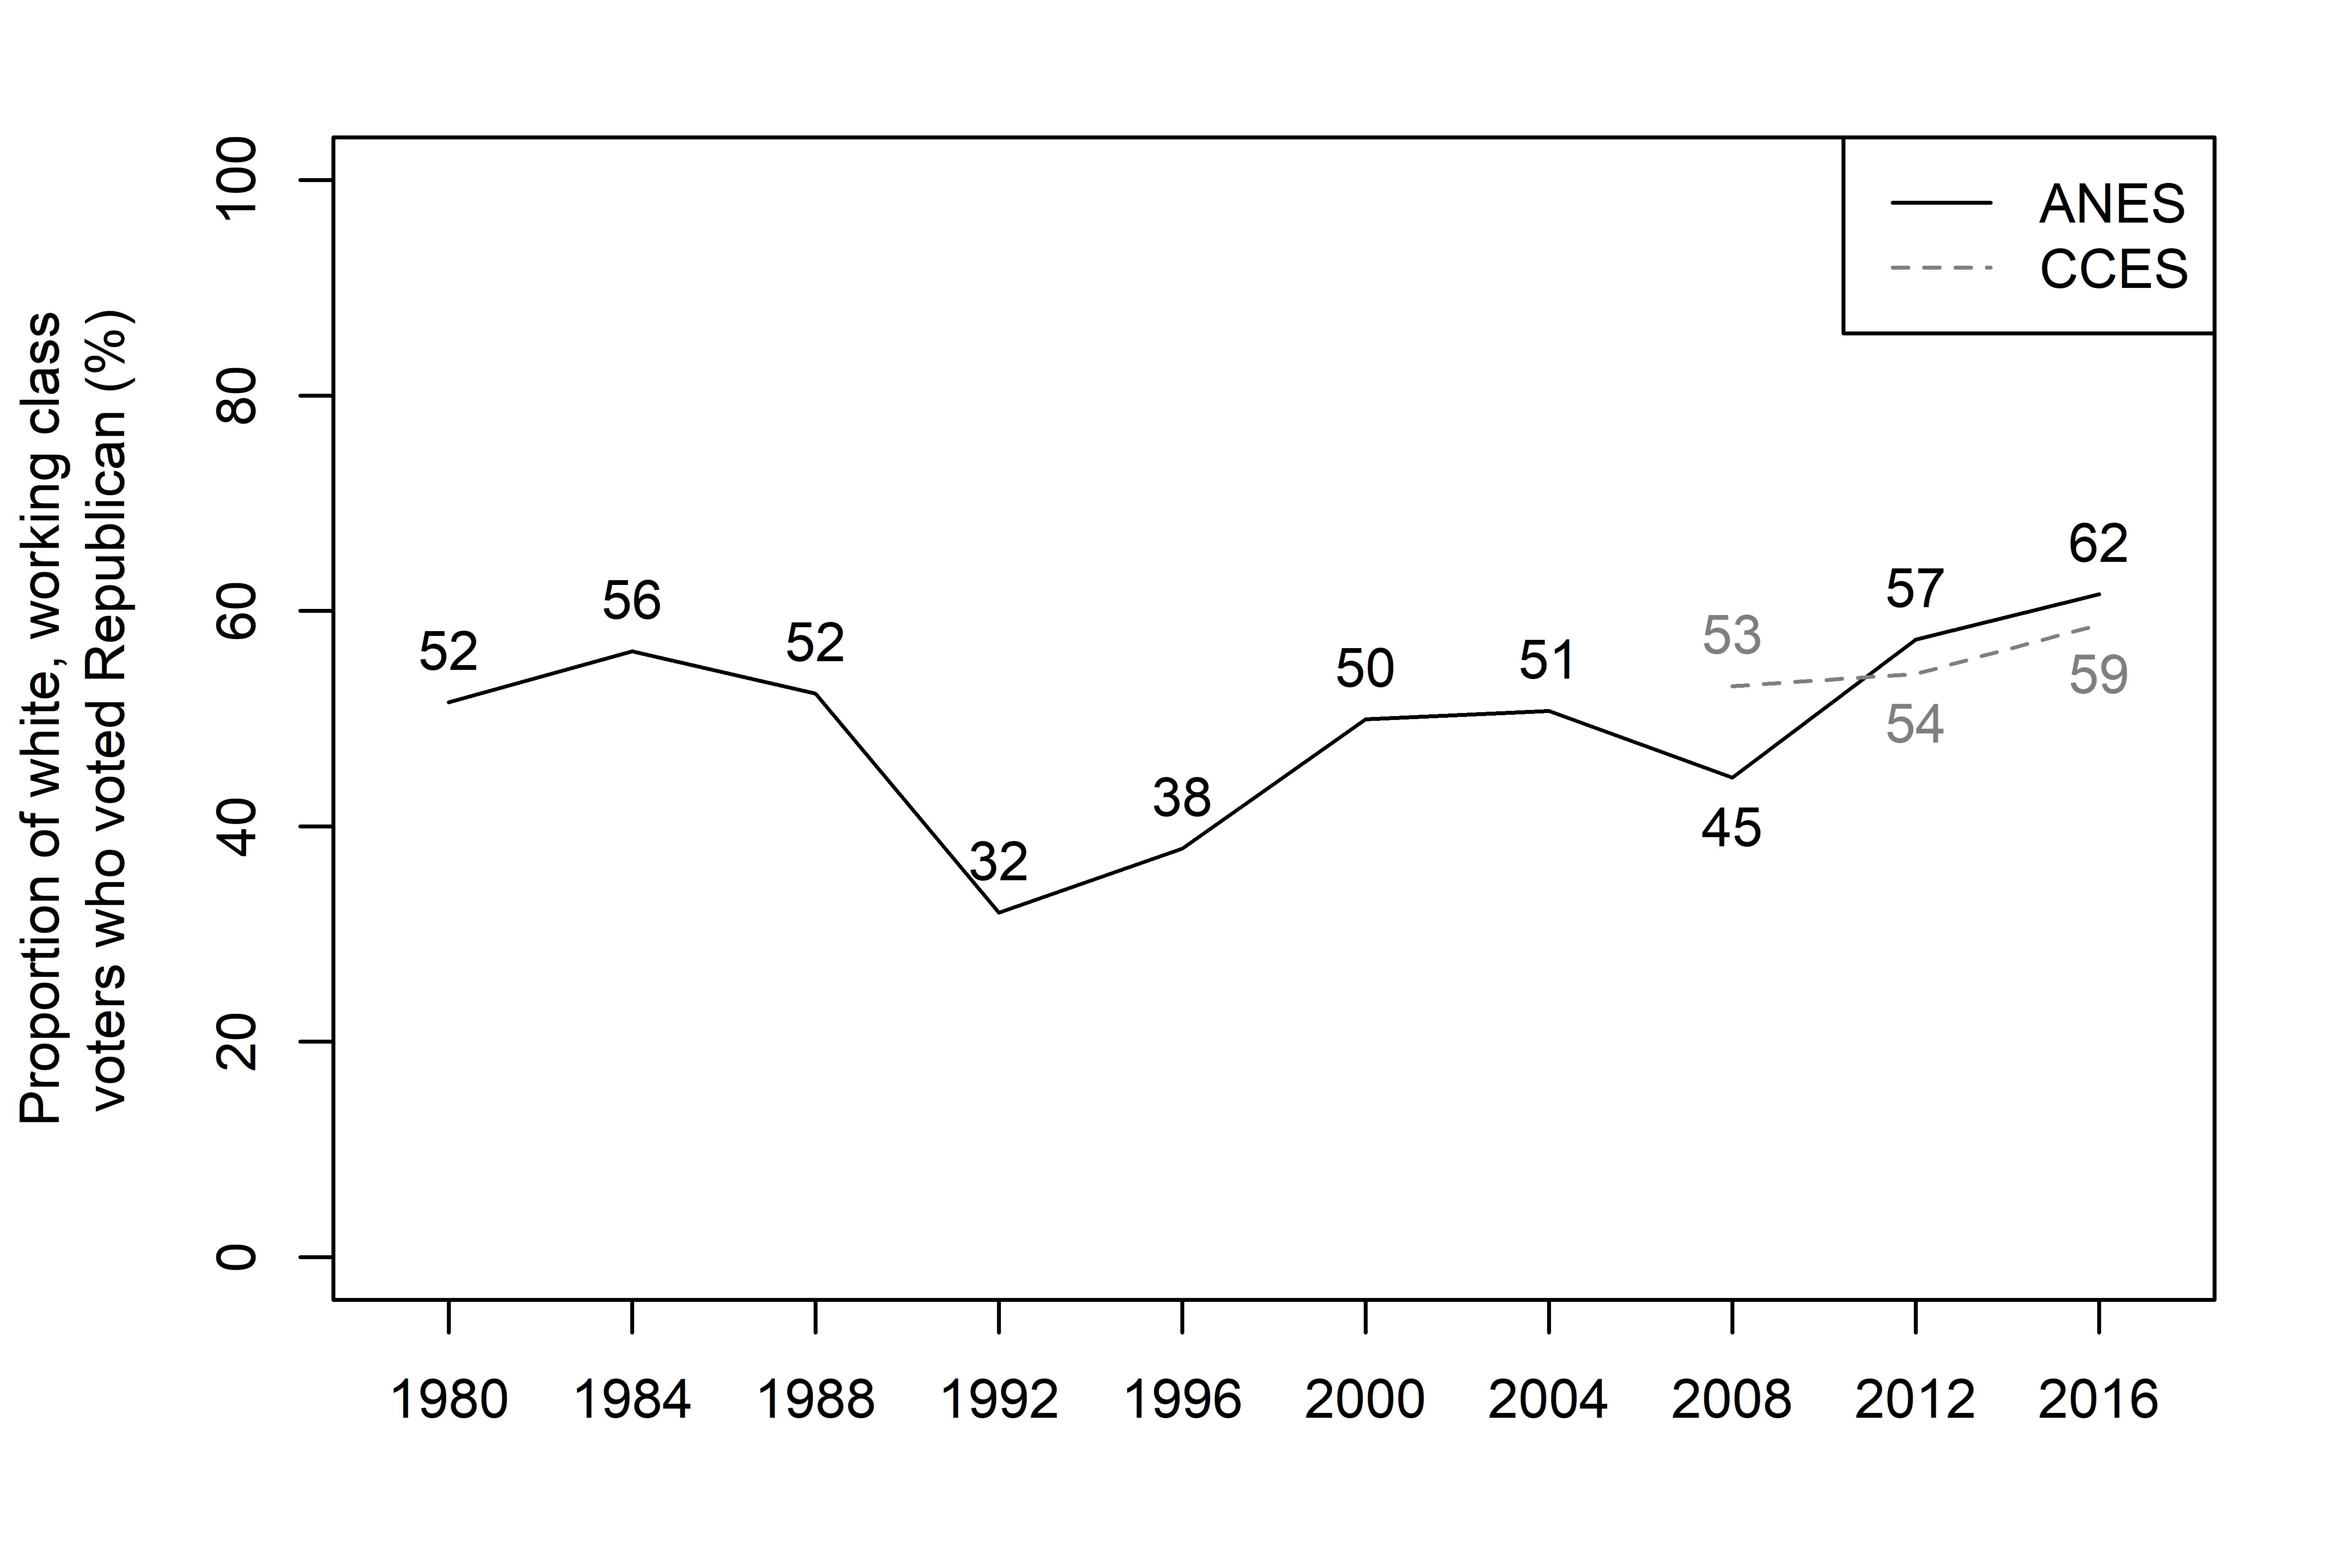 graph of data showing that white working-class voters have increasingly supported Republican candidates since 1992; support increased from 32% in 1992, to 50% in 2000, to 62% in 2016